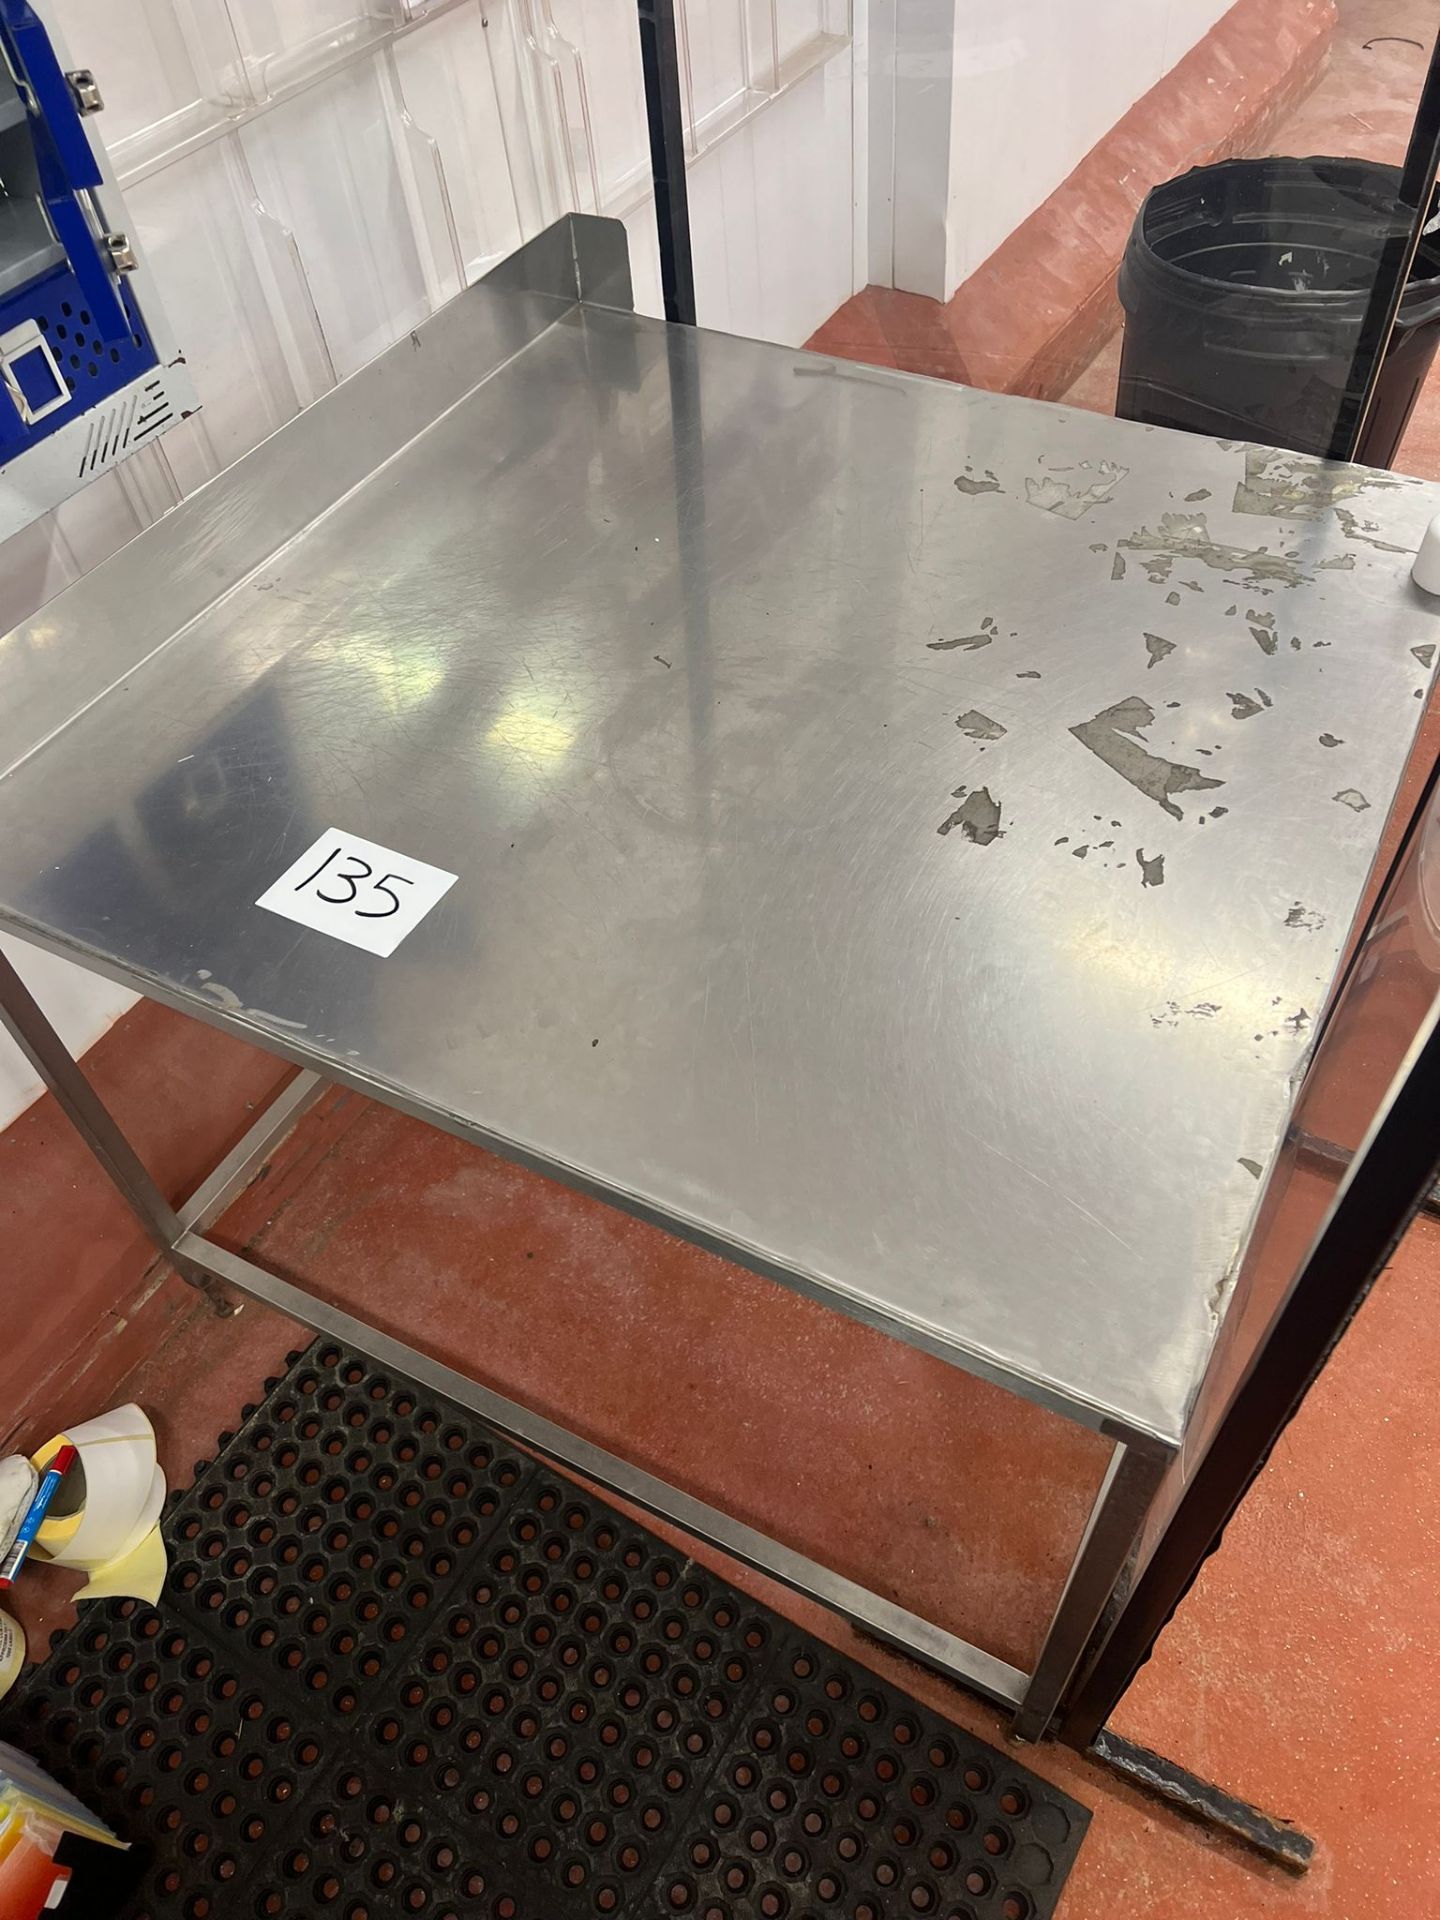 STAINLESS STEEL TABLE WITH PROTECTION SCREEN - Image 2 of 2